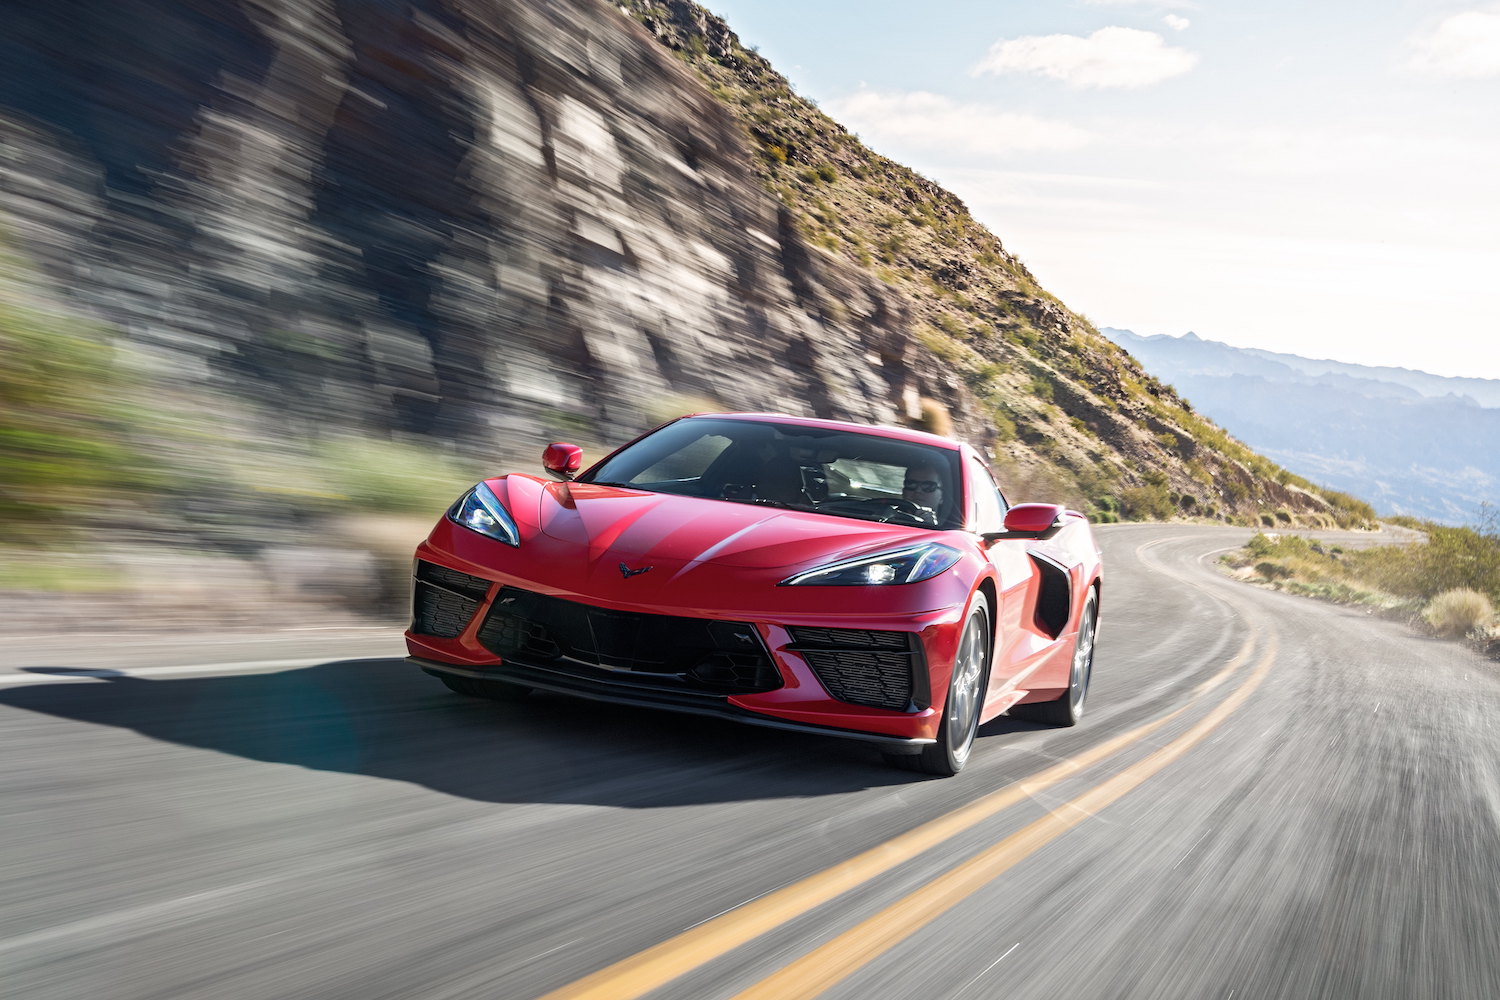 GM locked down the C8 Corvette's ECU, and now the aftermarket appears to be left out of the automaker's future.